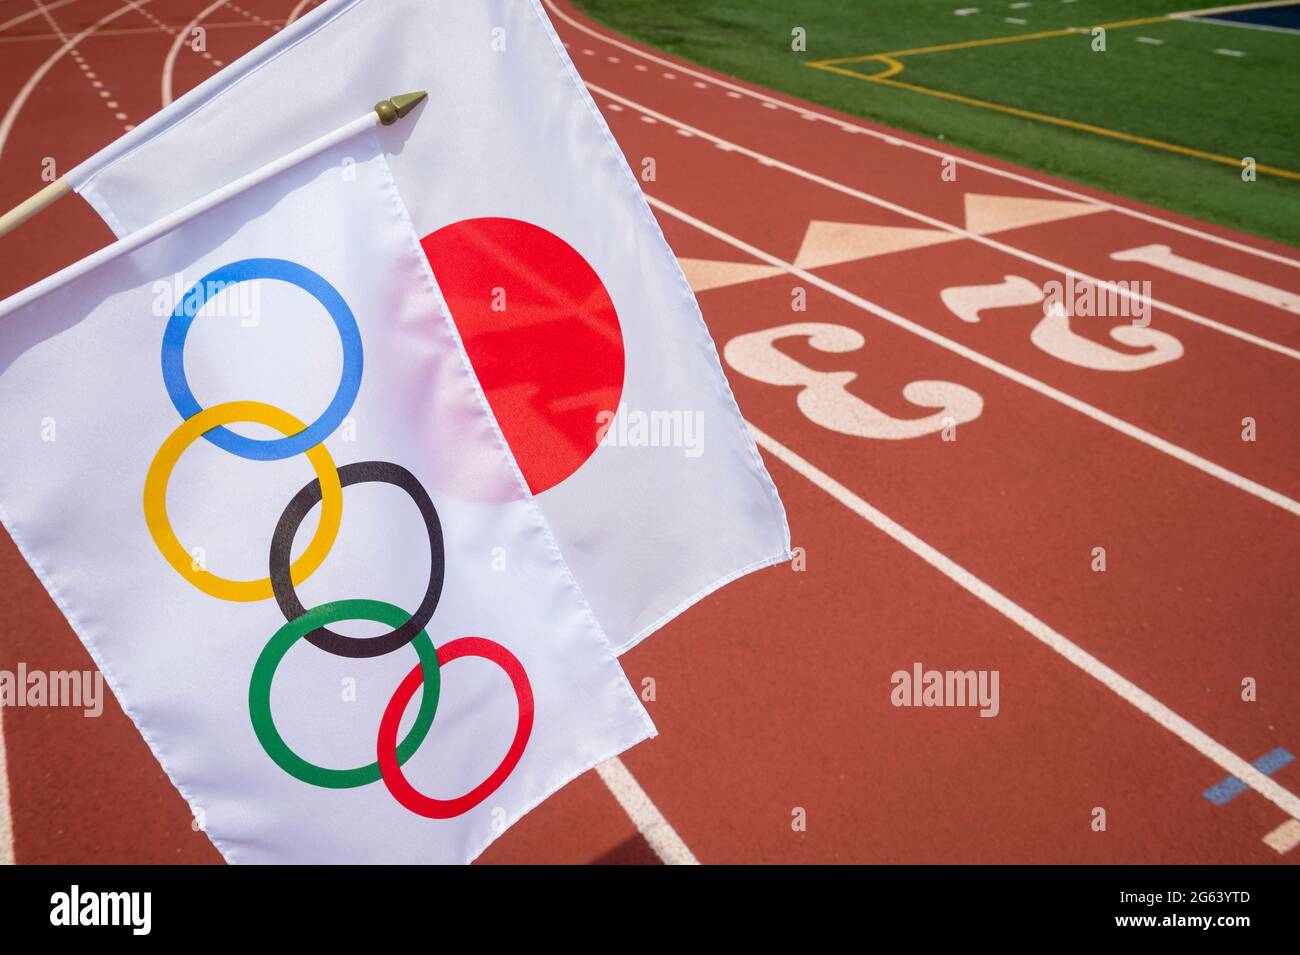 MIAMI, USA - AUGUST, 2019: An Olympic and Japanese flag flutter together above a red athletics track Stock Photo